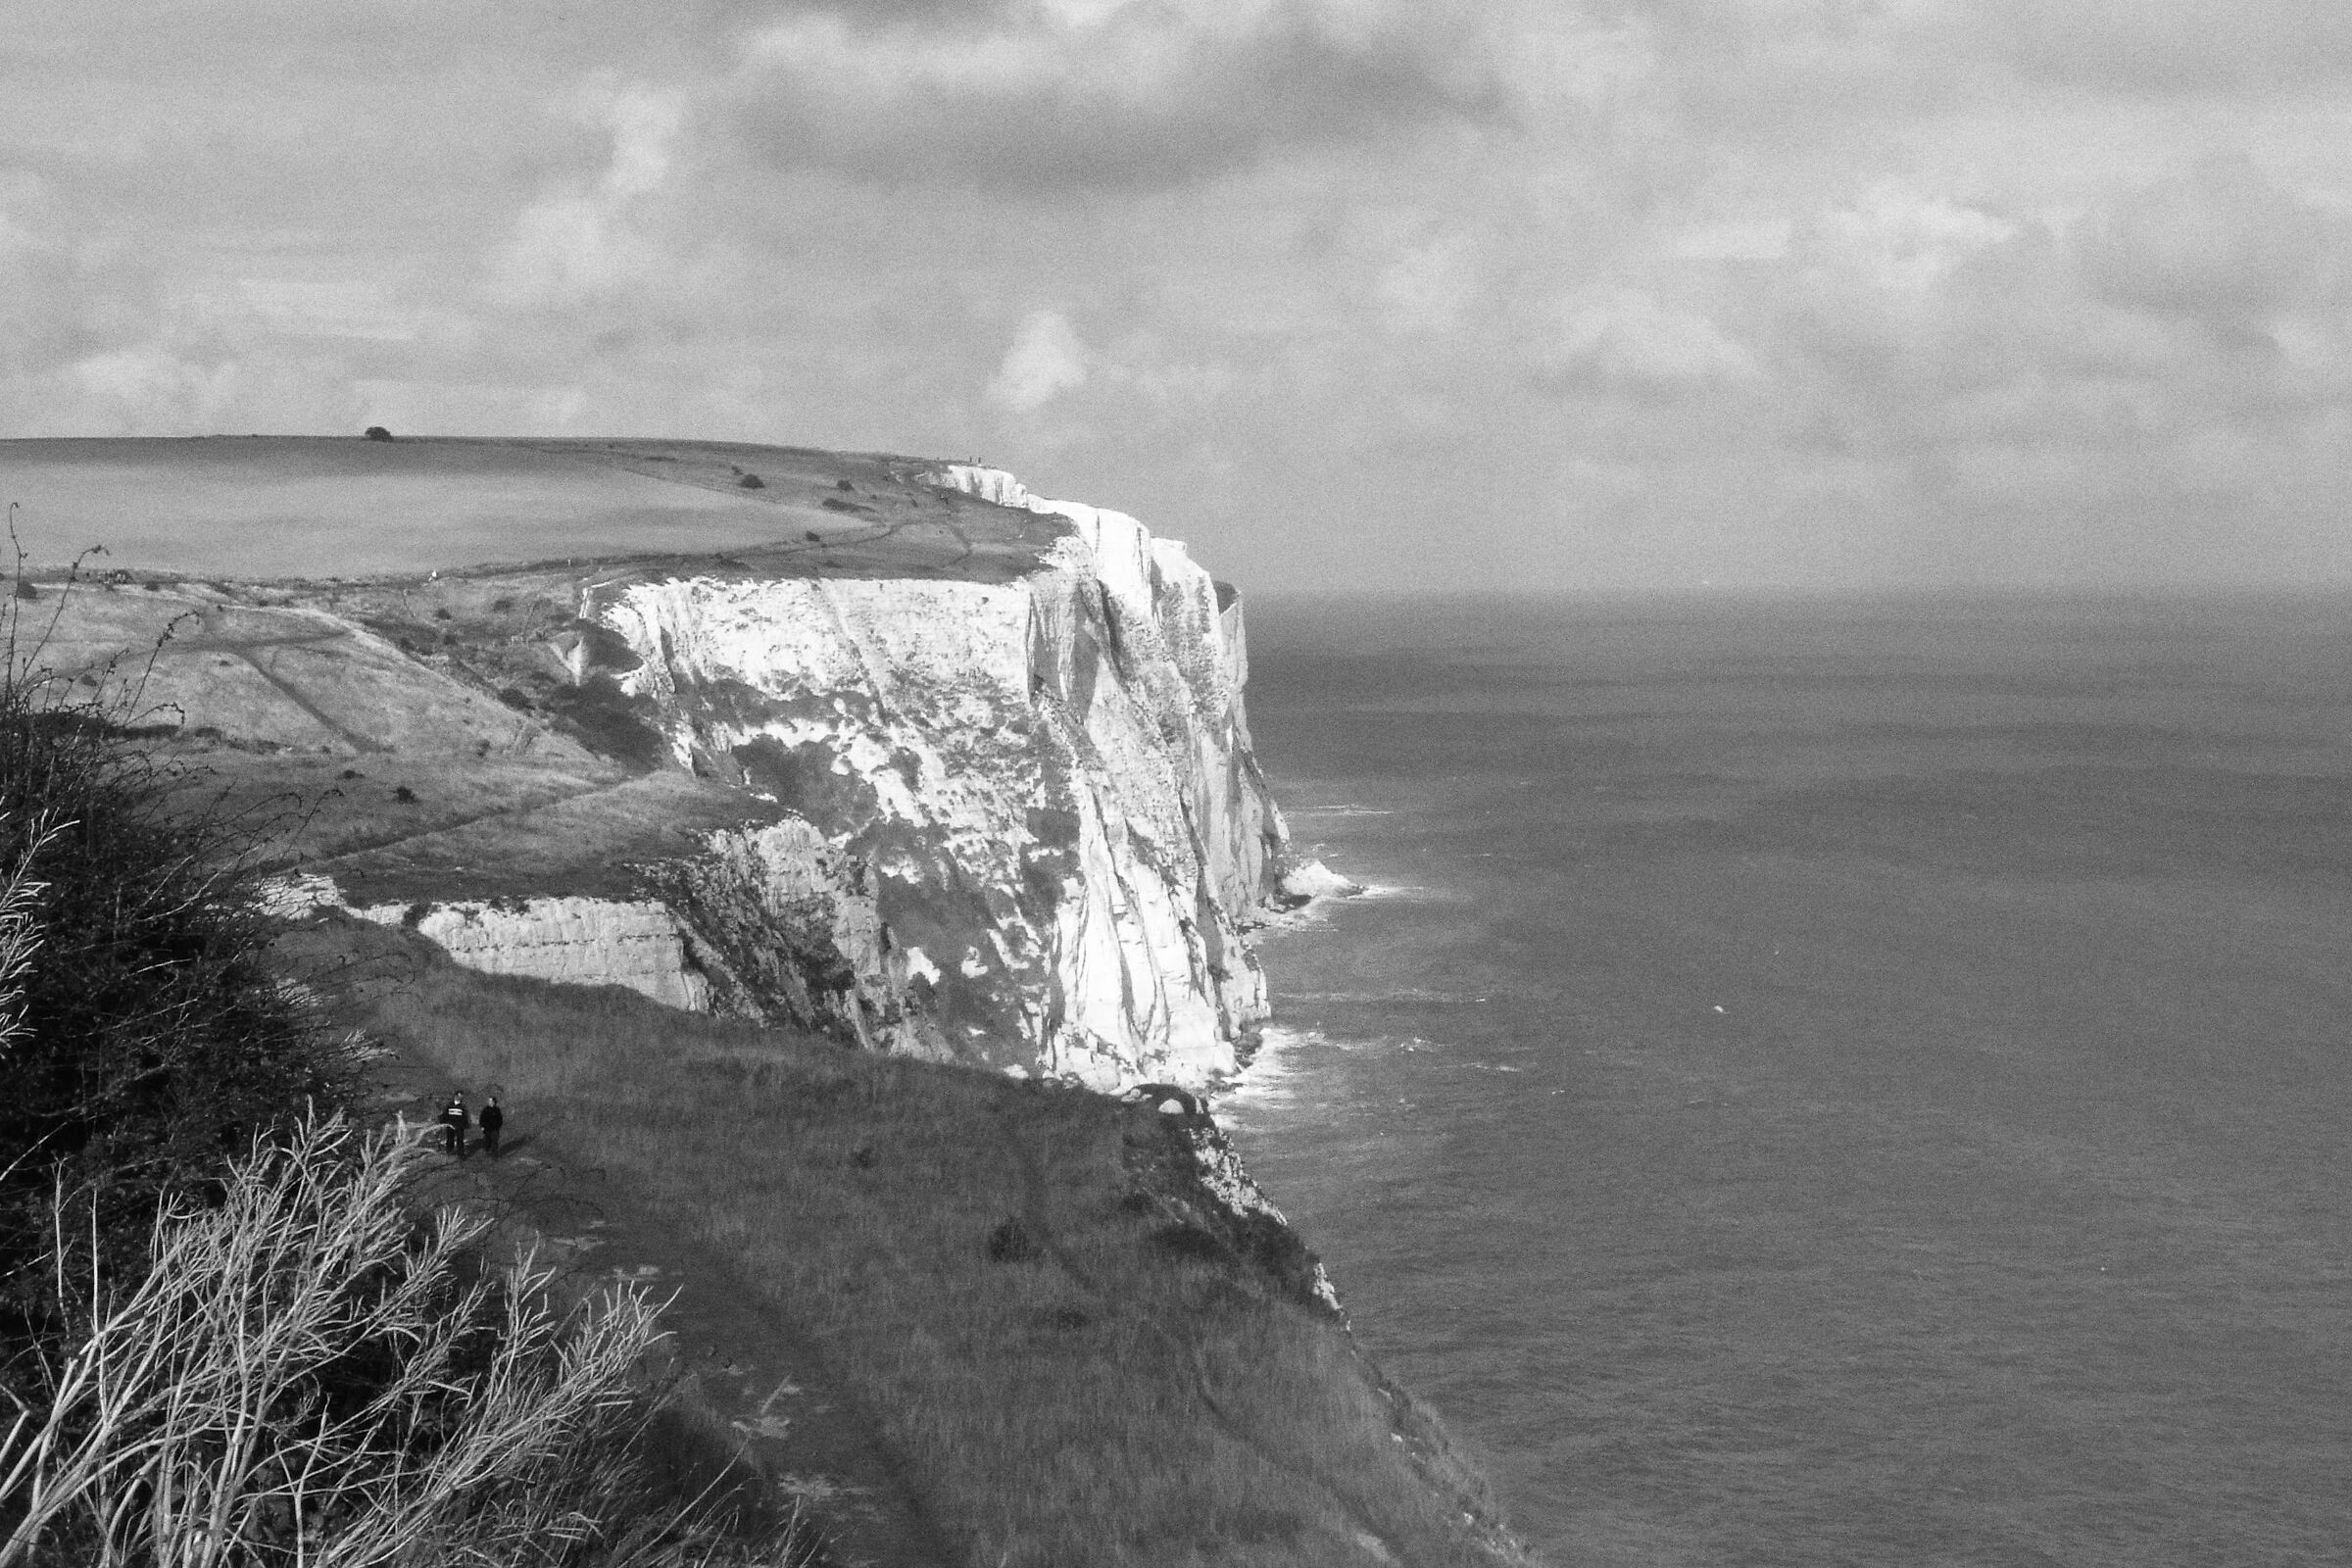 The white cliffs of Dover in a rainy August...